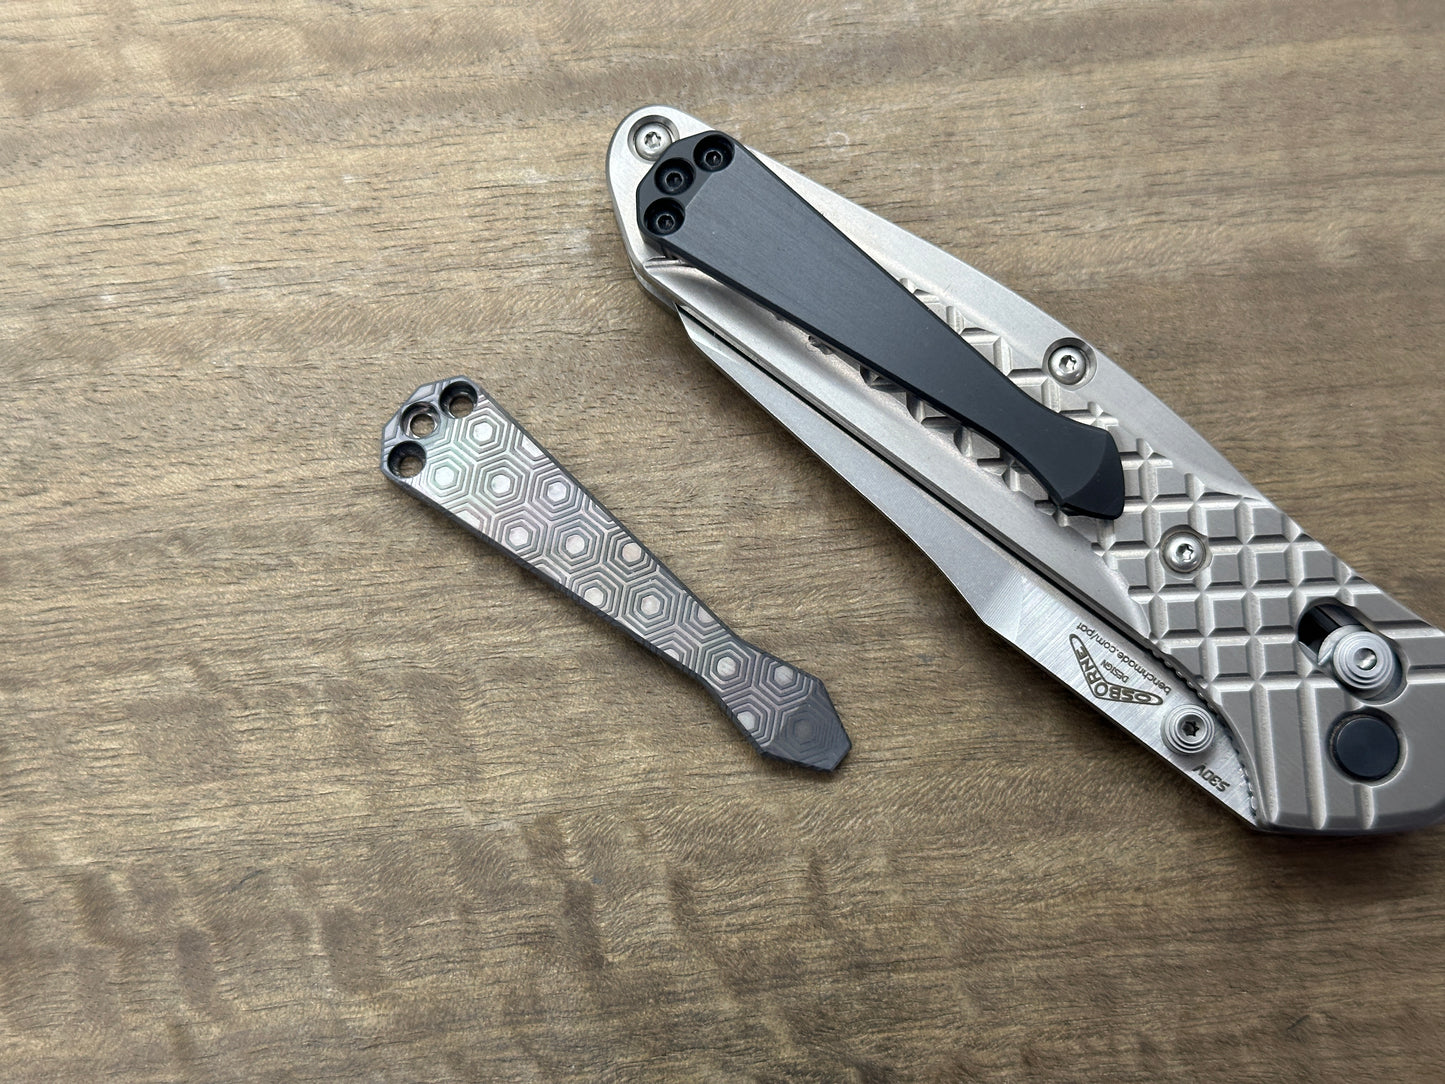 Dark HONEYCOMB engraved Dmd Titanium CLIP for most Benchmade models